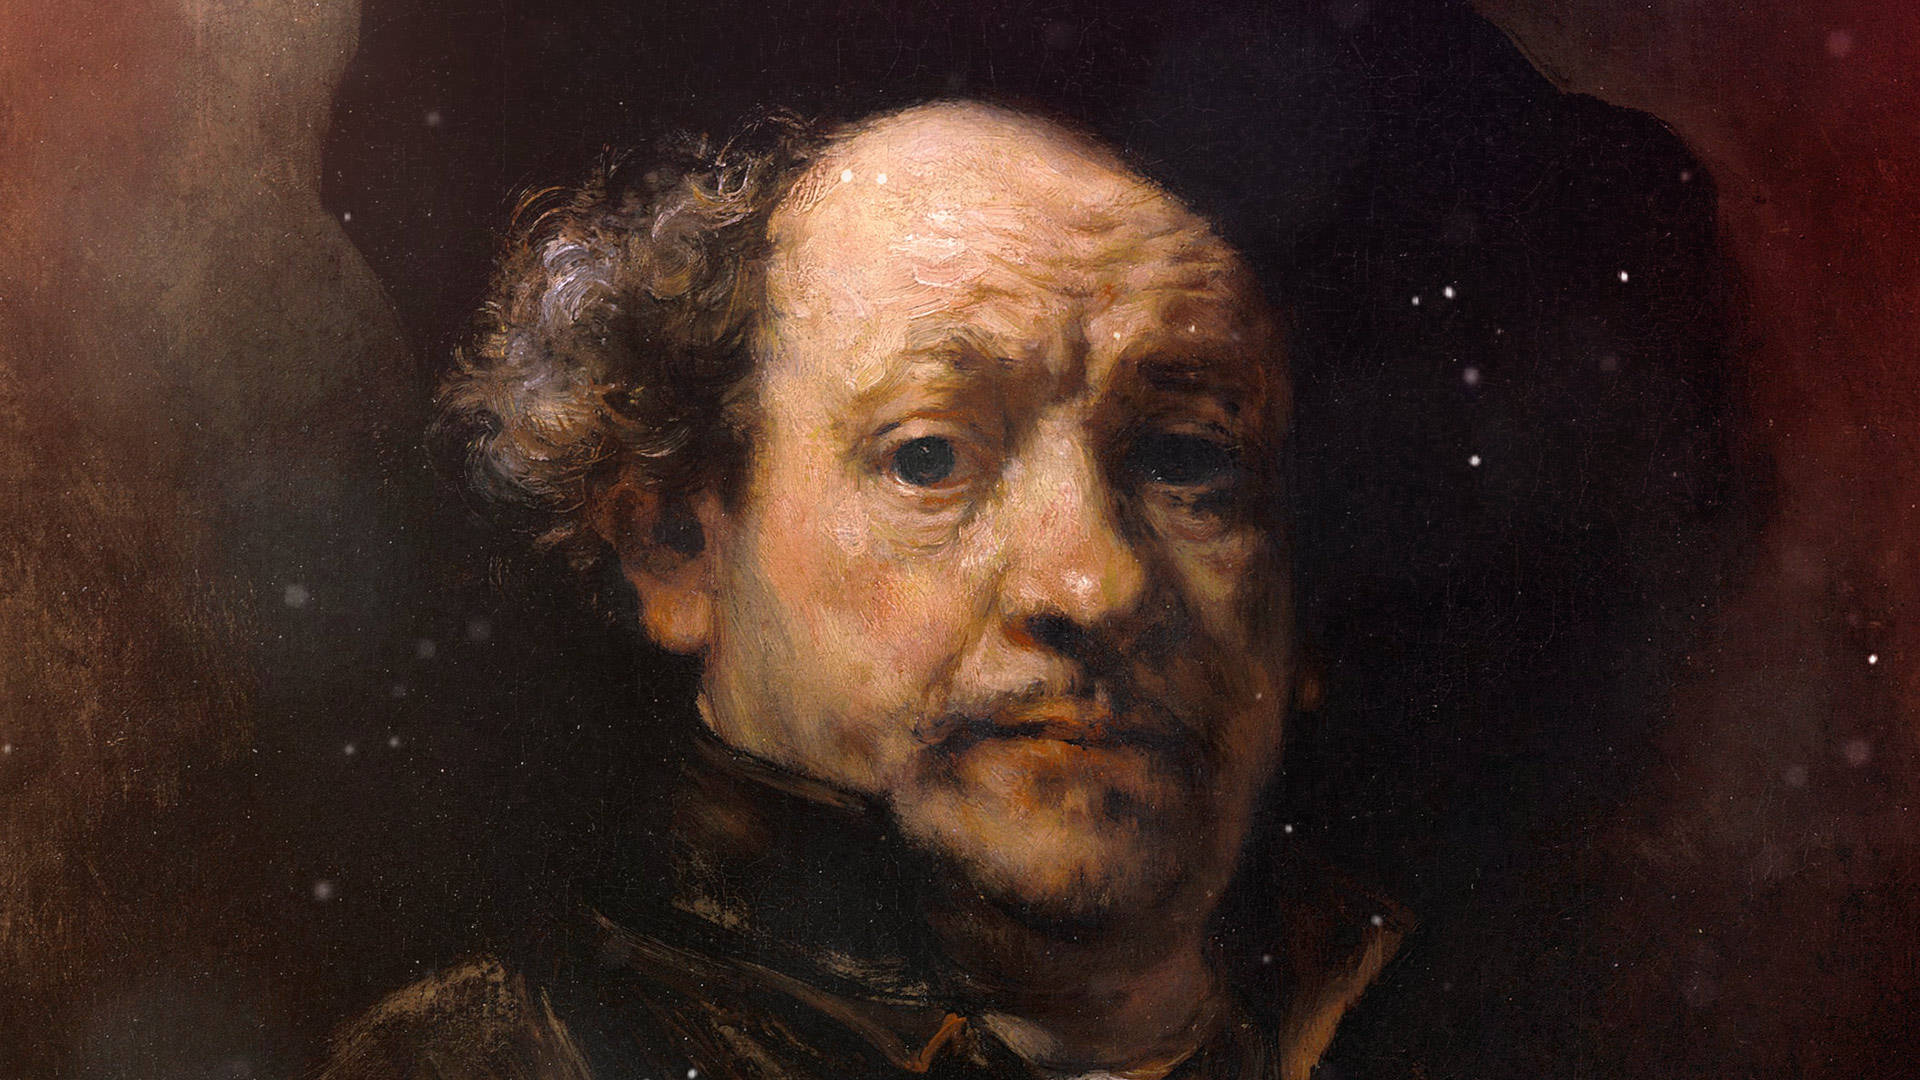 Rembrandt Wallpapers